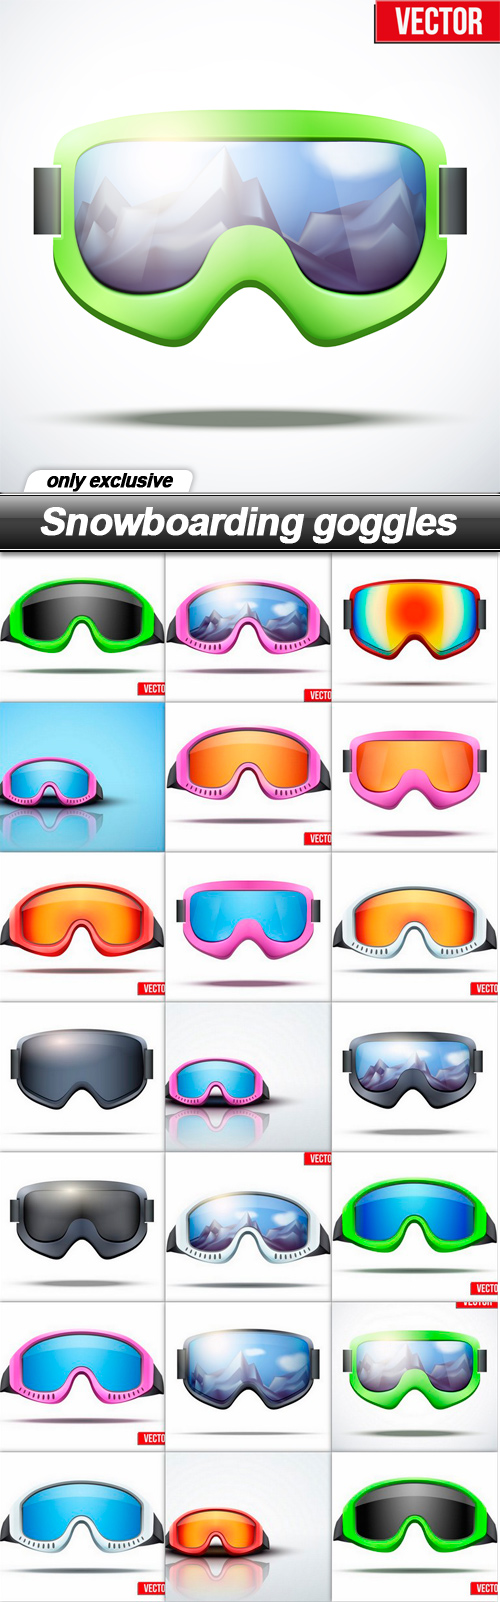 Snowboarding goggles - 20 EPS